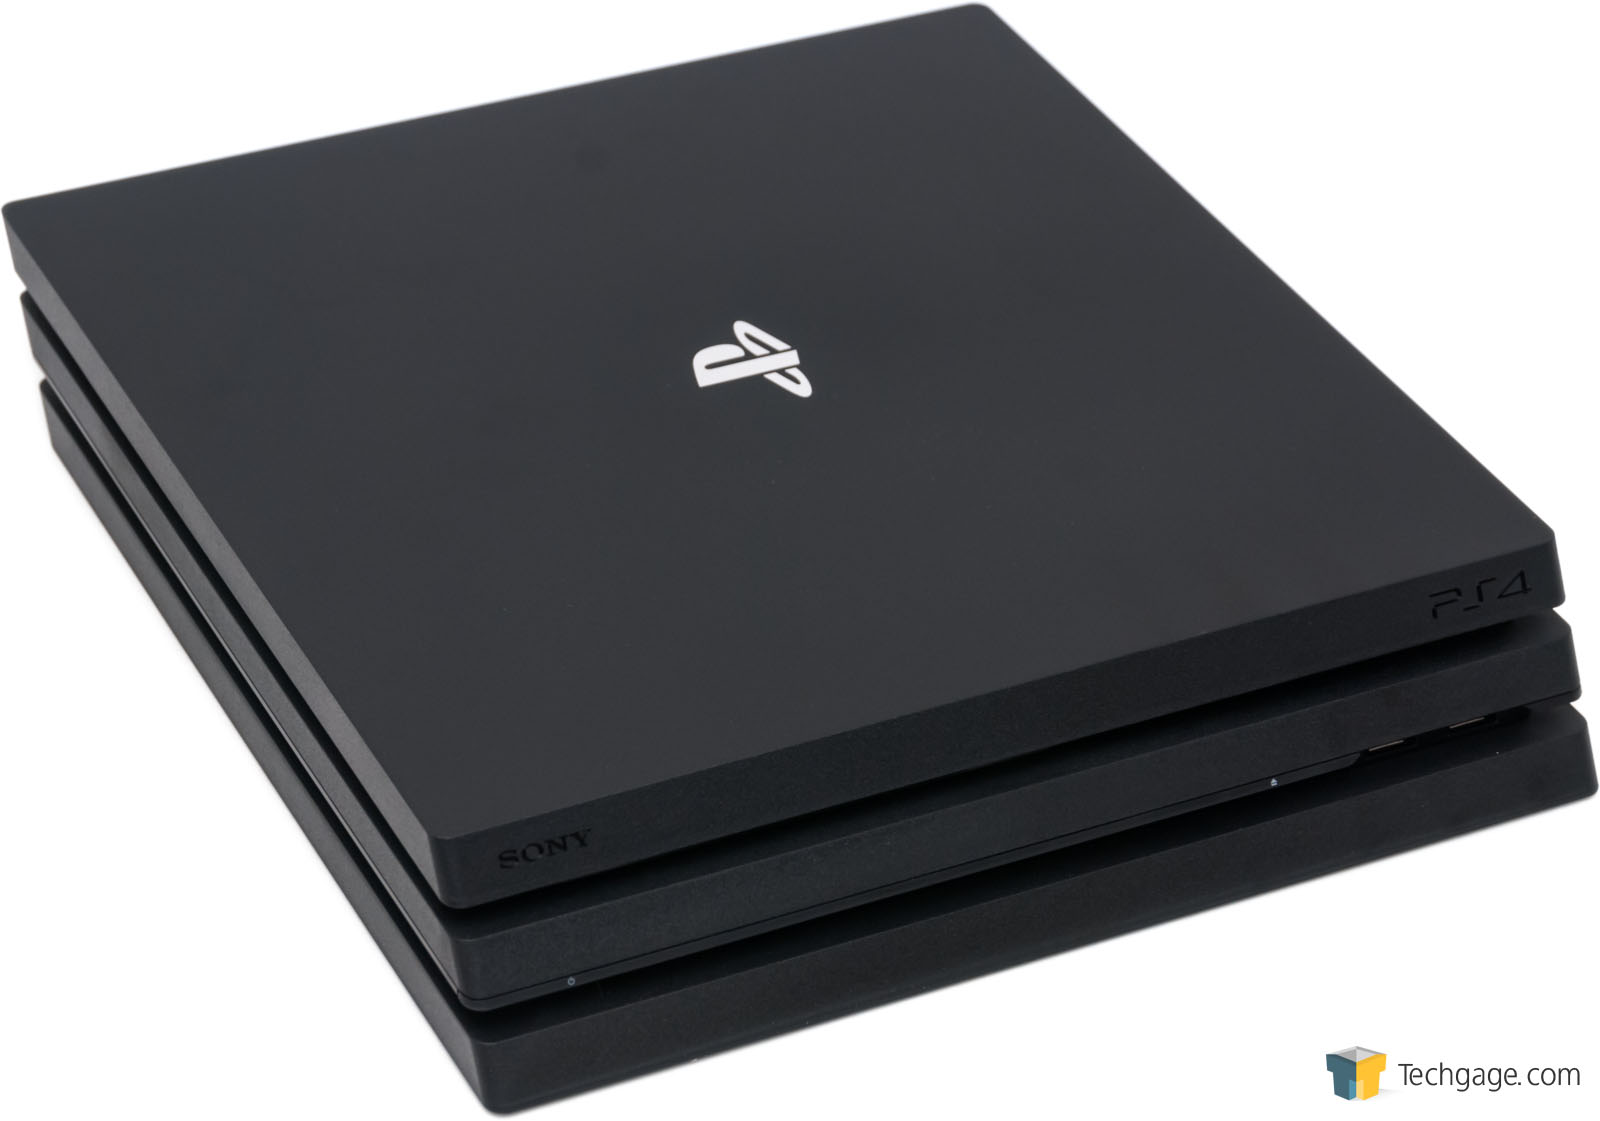 PlayStation 4 Pro Review: PlayStation 4 Meets 4K Graphics